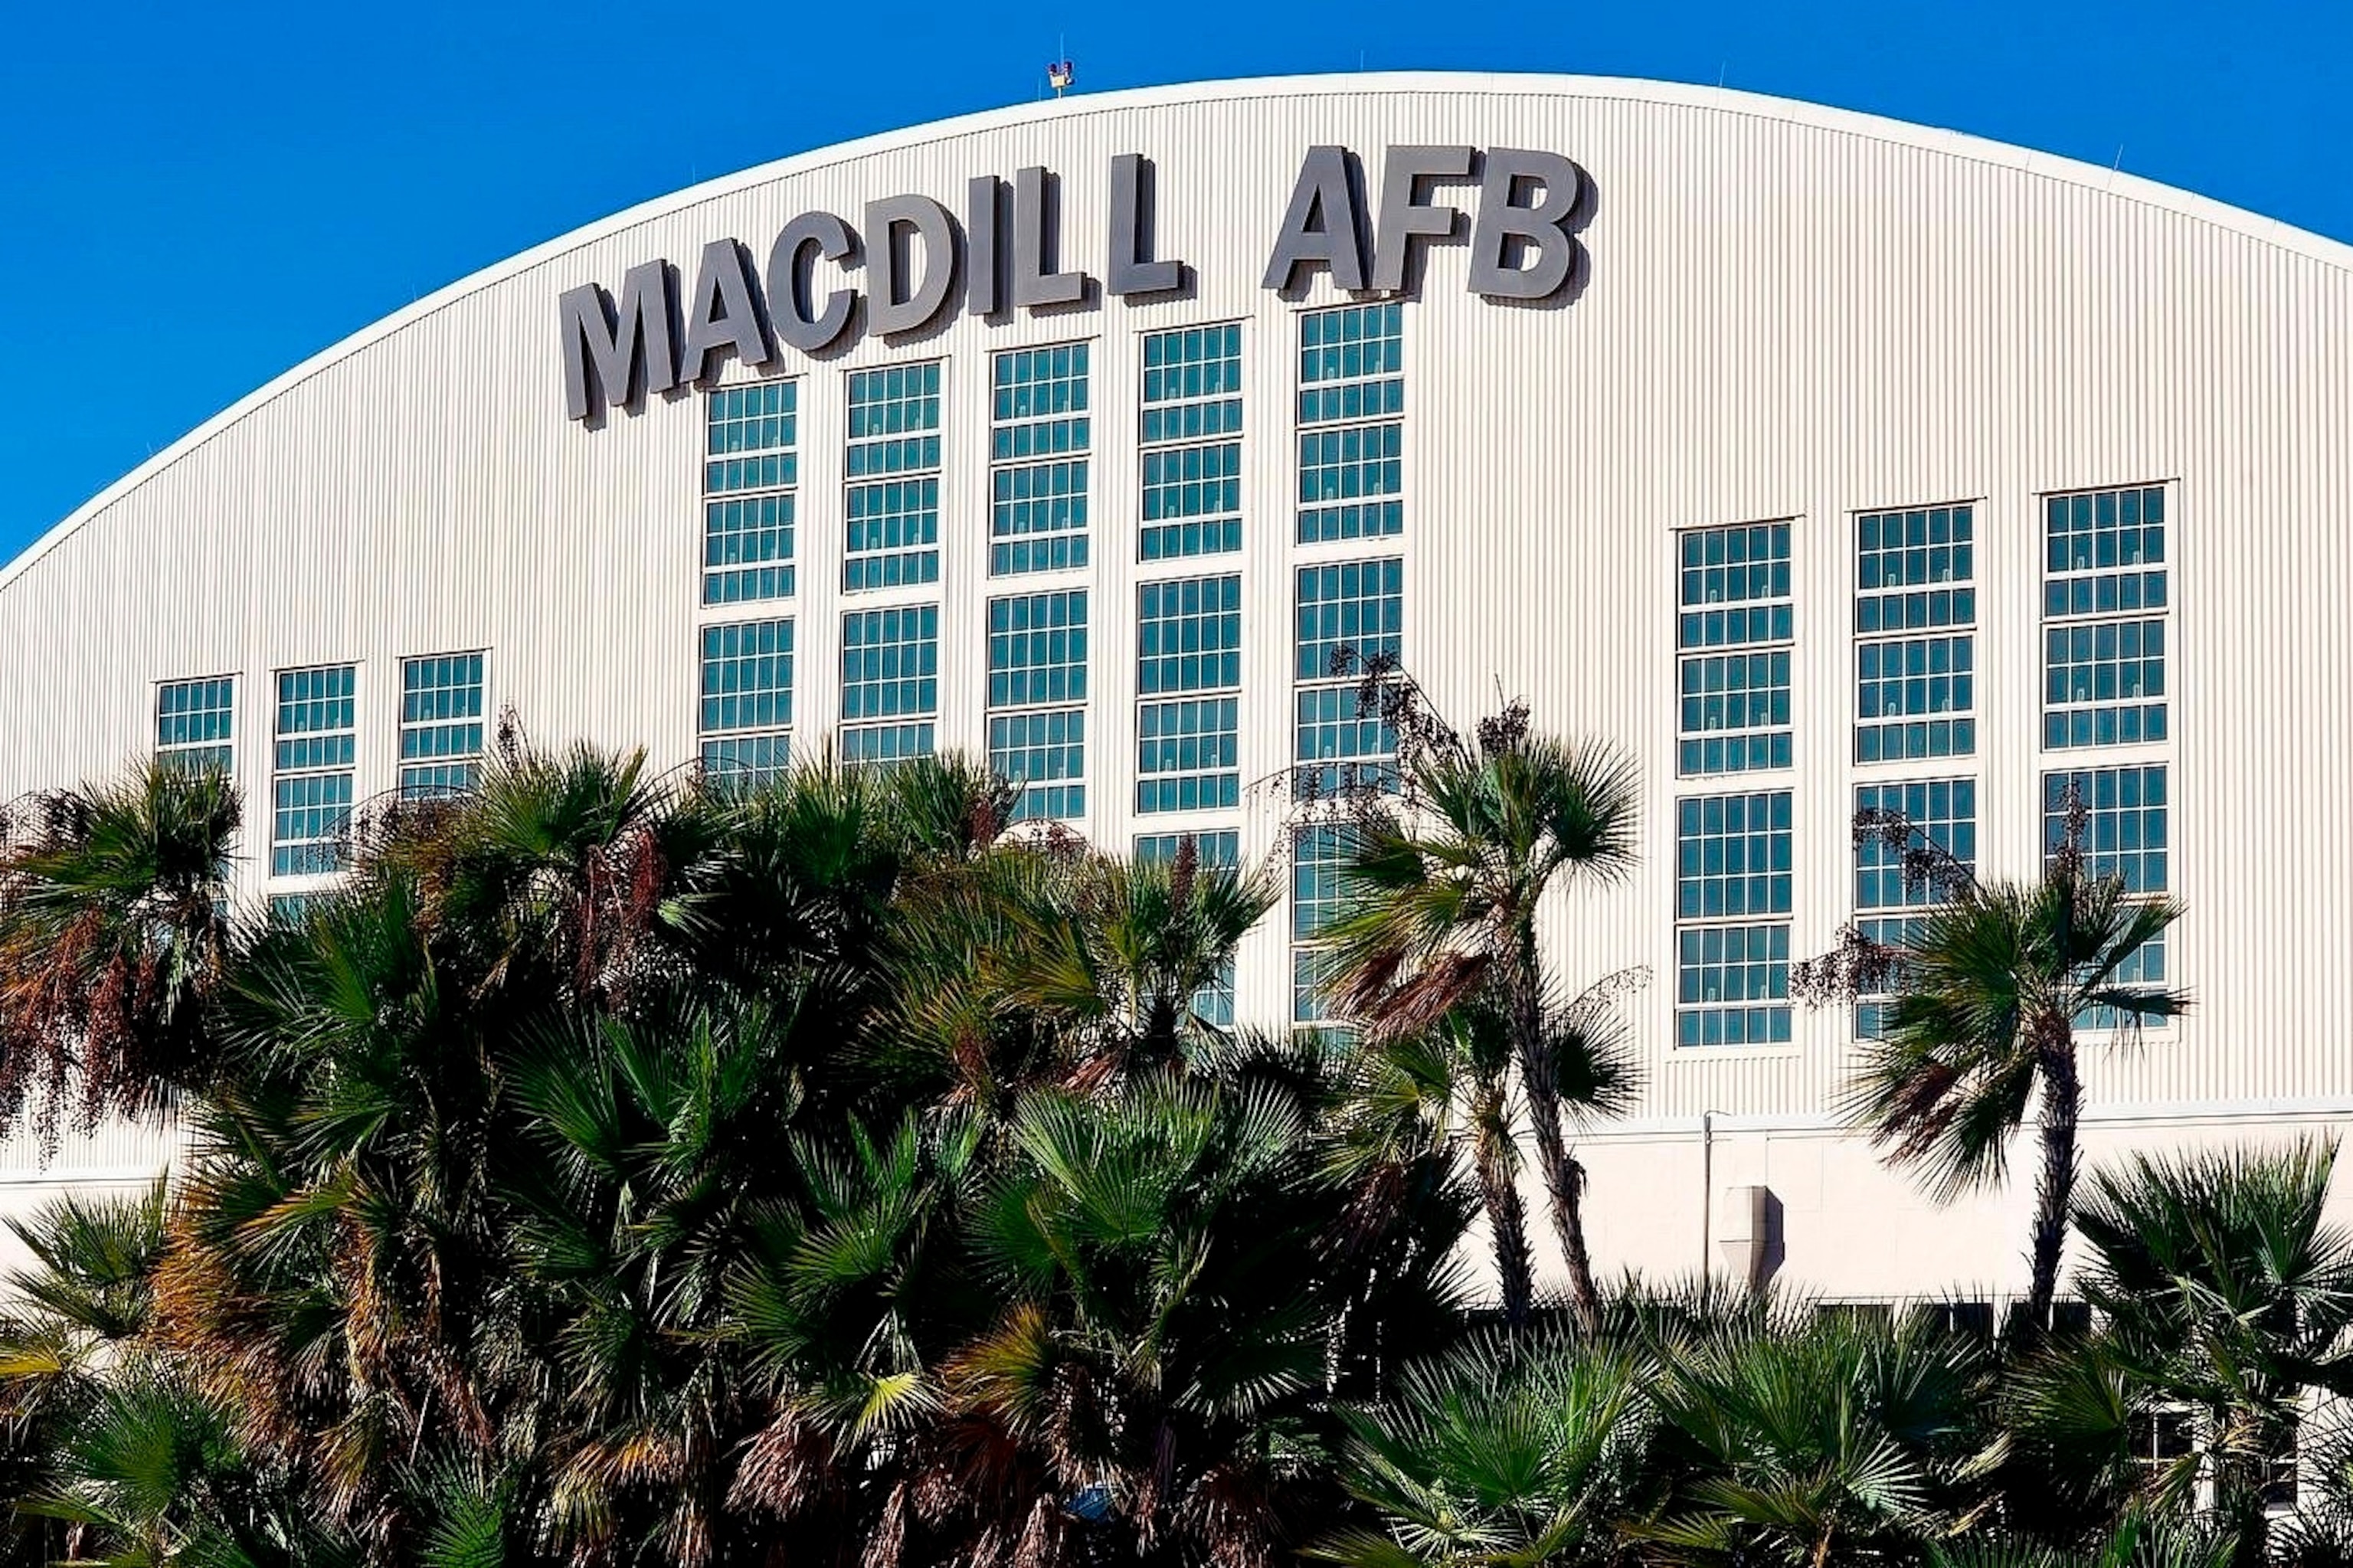 PHOTO: In this Jan. 4, 2021, file photo provided by the U.S. Air Force, a hangar is shown at MacDill Air Force Base in Tampa, Fla. 